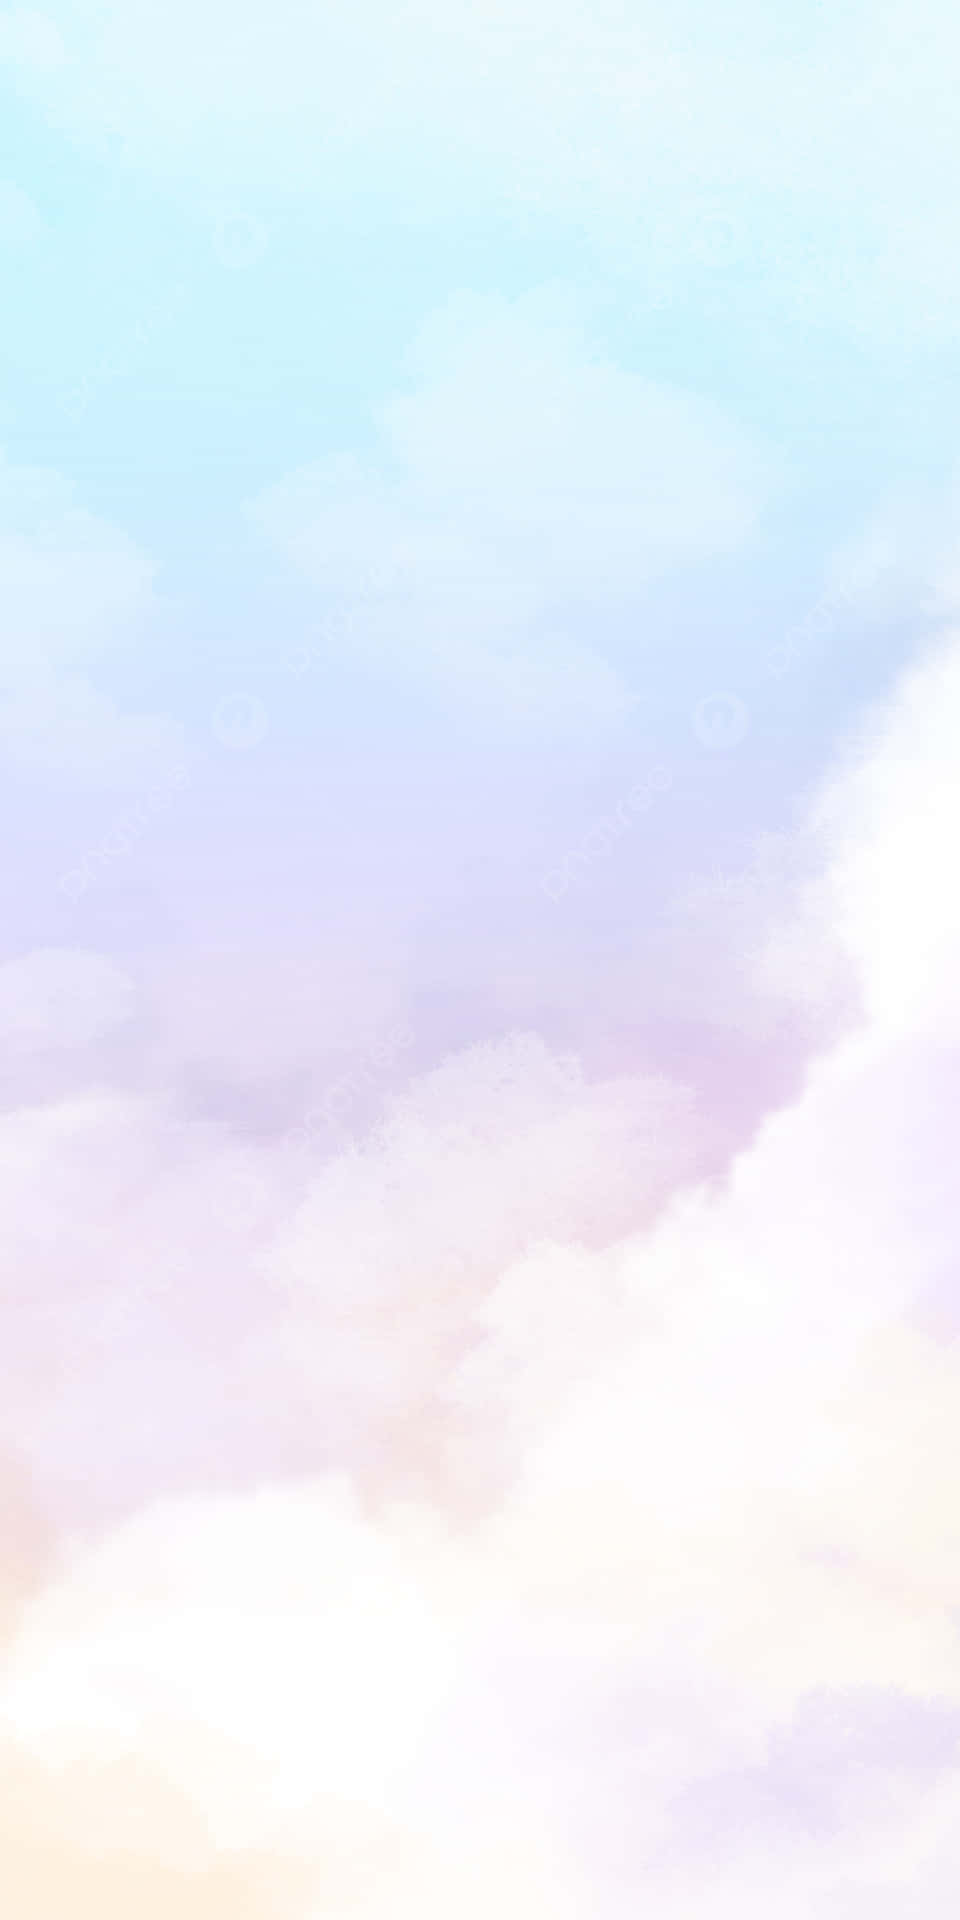 A Watercolor Background With Clouds Wallpaper